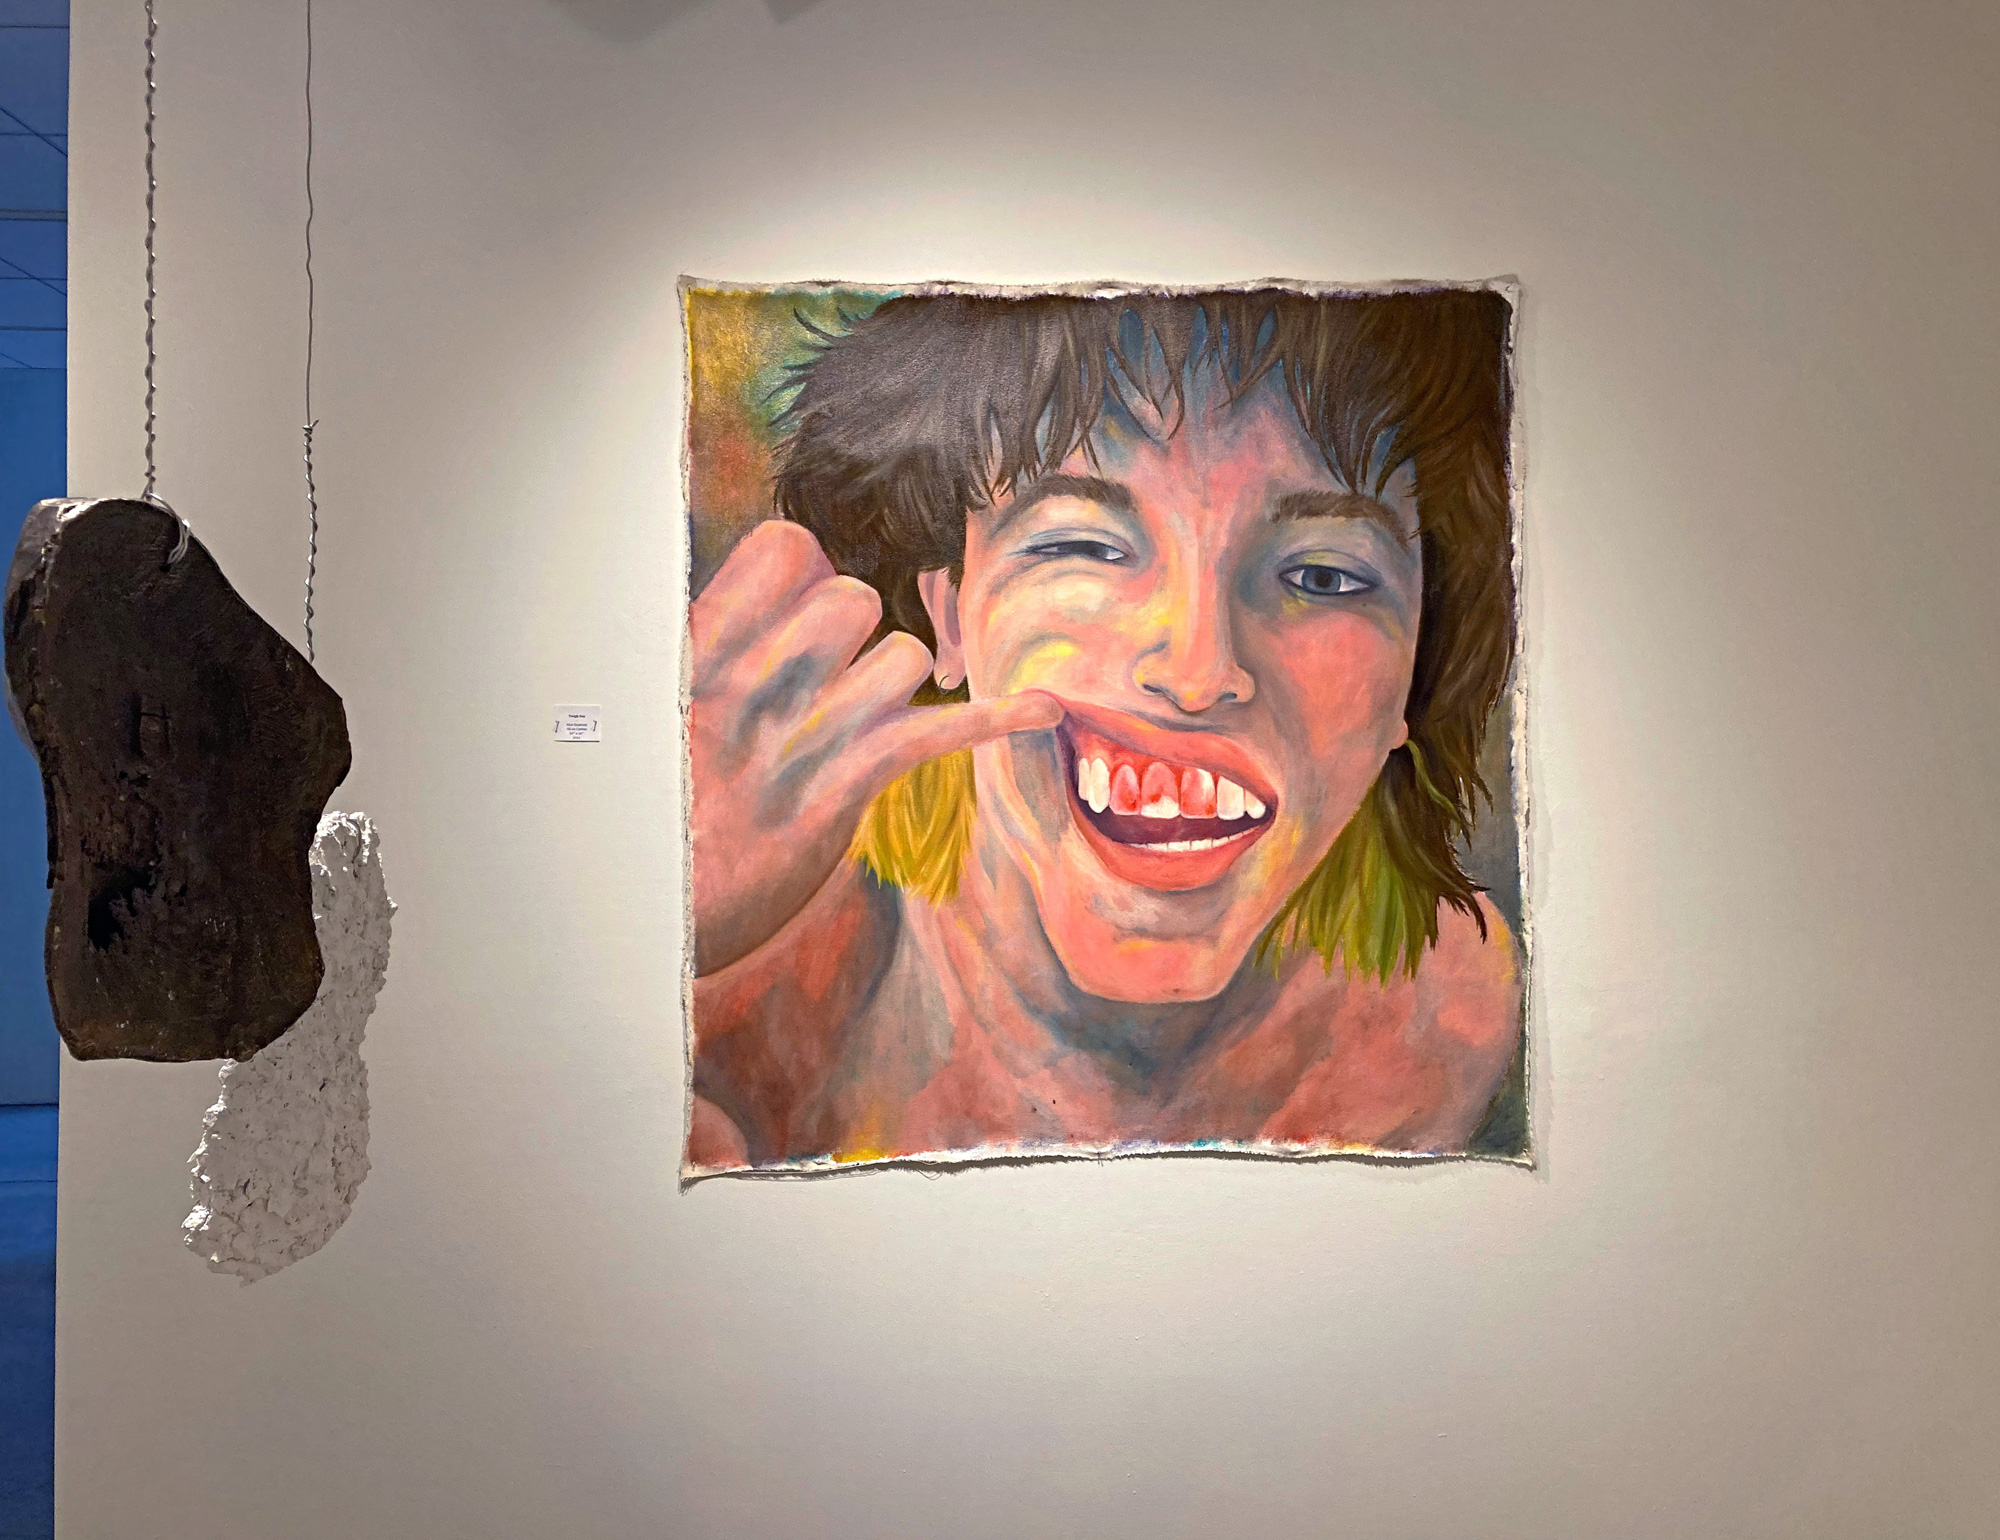 Painting of a portrait of a person showing their teeth